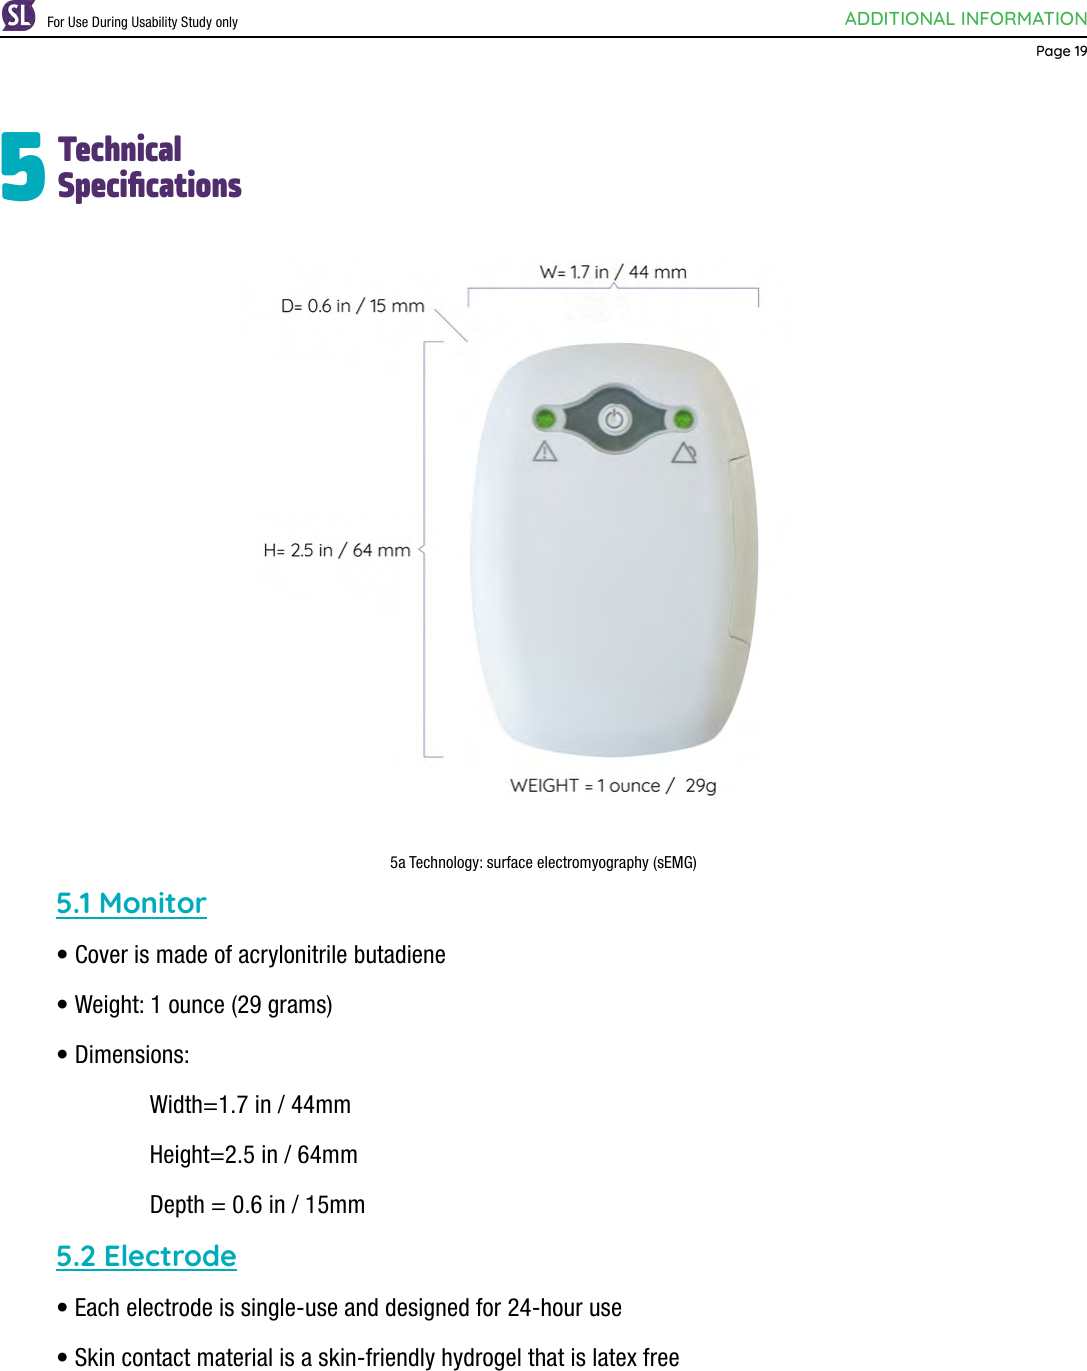 ADDITIONAL INFORMATIONPage 19TechnicalSpecications55a Technology: surface electromyography (sEMG)5.1 Monitor• Cover is made of acrylonitrile butadiene • Weight: 1 ounce (29 grams)• Dimensions:     Width=1.7 in / 44mm    Height=2.5 in / 64mm    Depth = 0.6 in / 15mm5.2 Electrode• Each electrode is single-use and designed for 24-hour use• Skin contact material is a skin-friendly hydrogel that is latex freeFor Use During Usability Study only